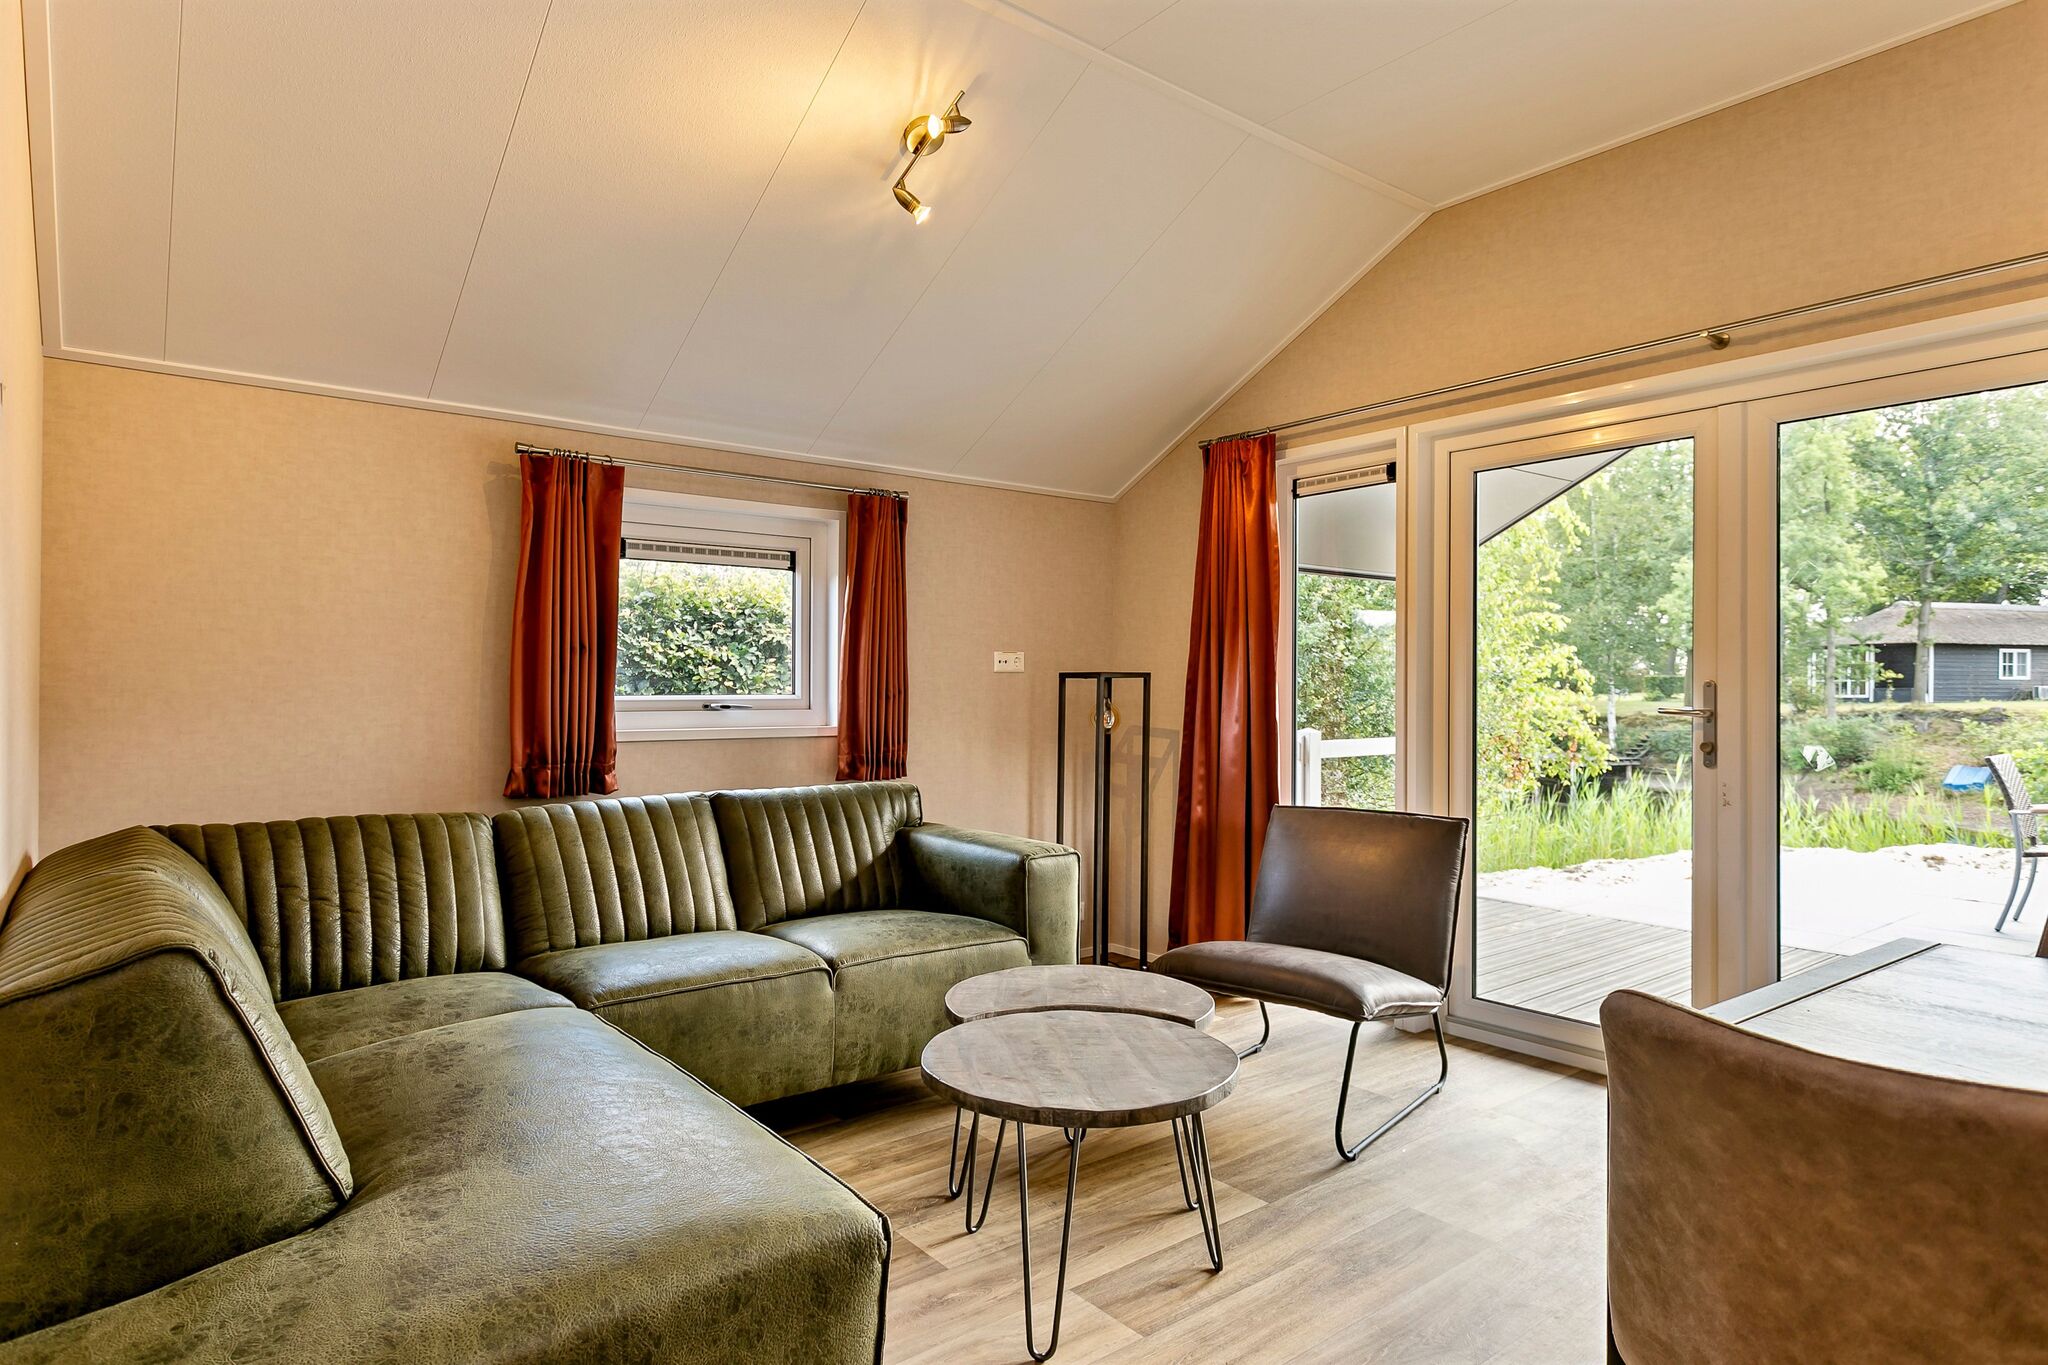 Luxurious lodge with airco, located beside a lake